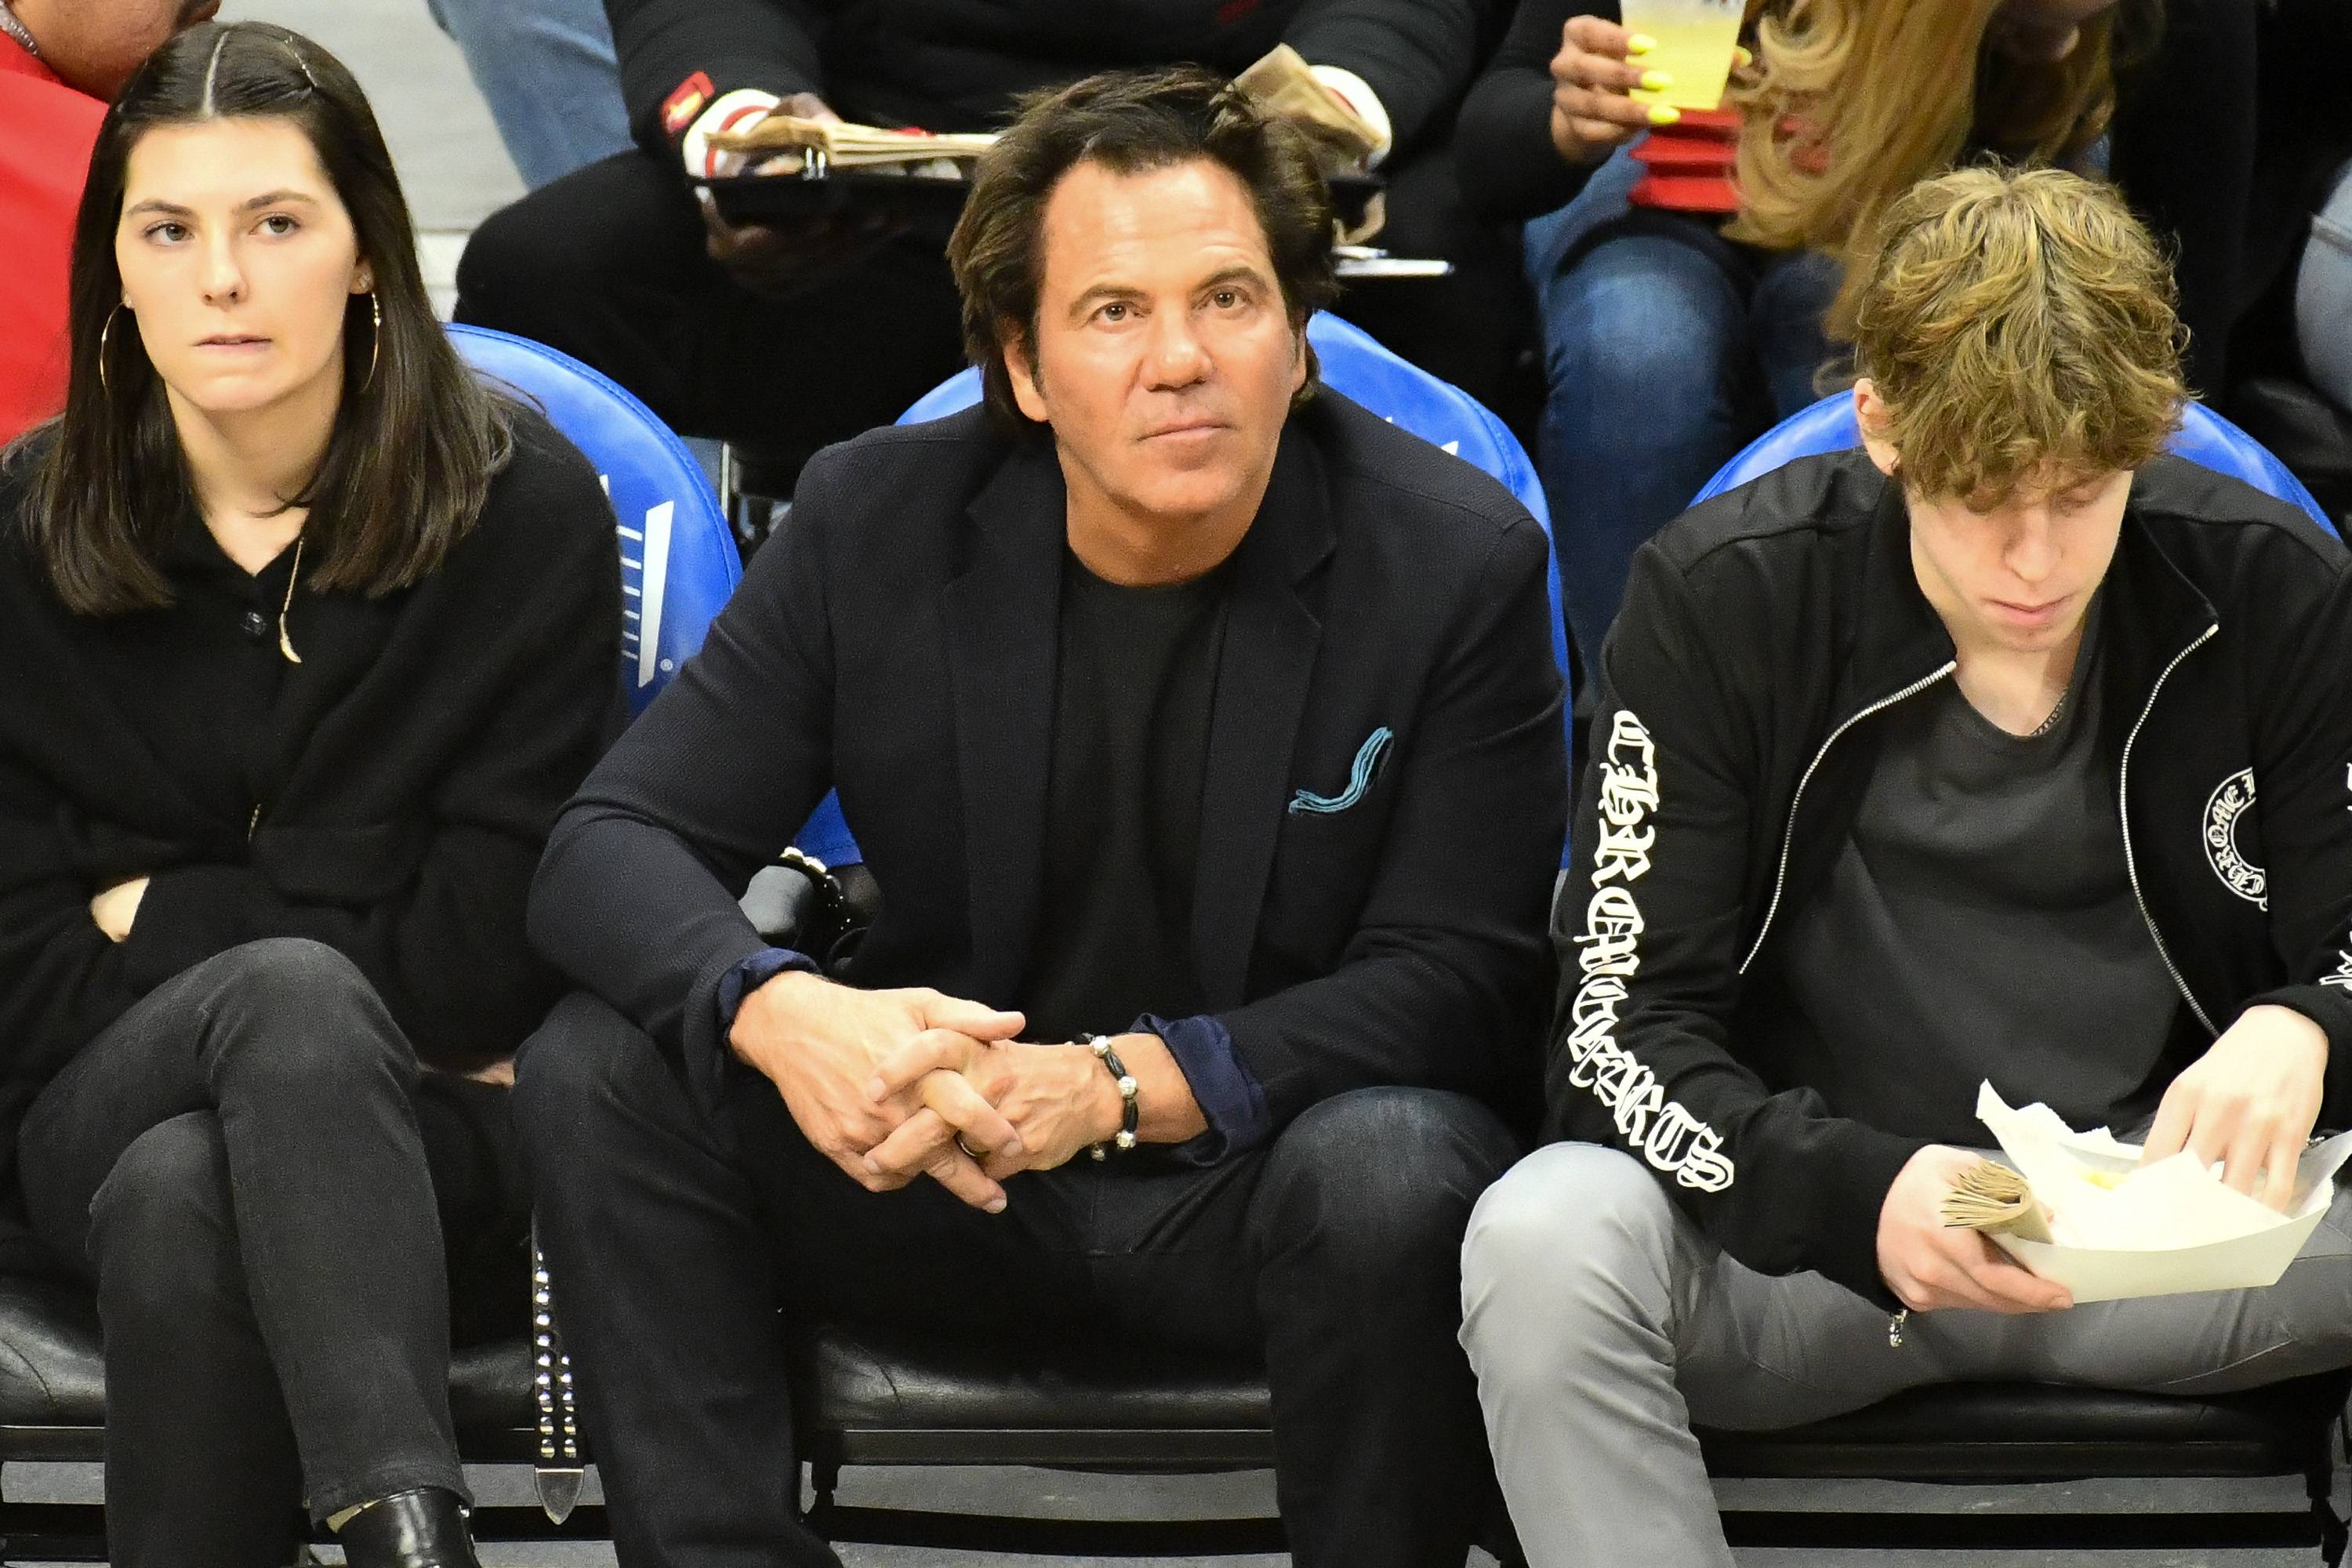 LOS ANGELES, CALIFORNIA - JANUARY 02: Tom Gores attends a basketball game between the Los Angeles Clippers and the Detroit Pistons at Staples Center on January 02, 2020 in Los Angeles, California. (Photo by Allen Berezovsky/Getty Images)